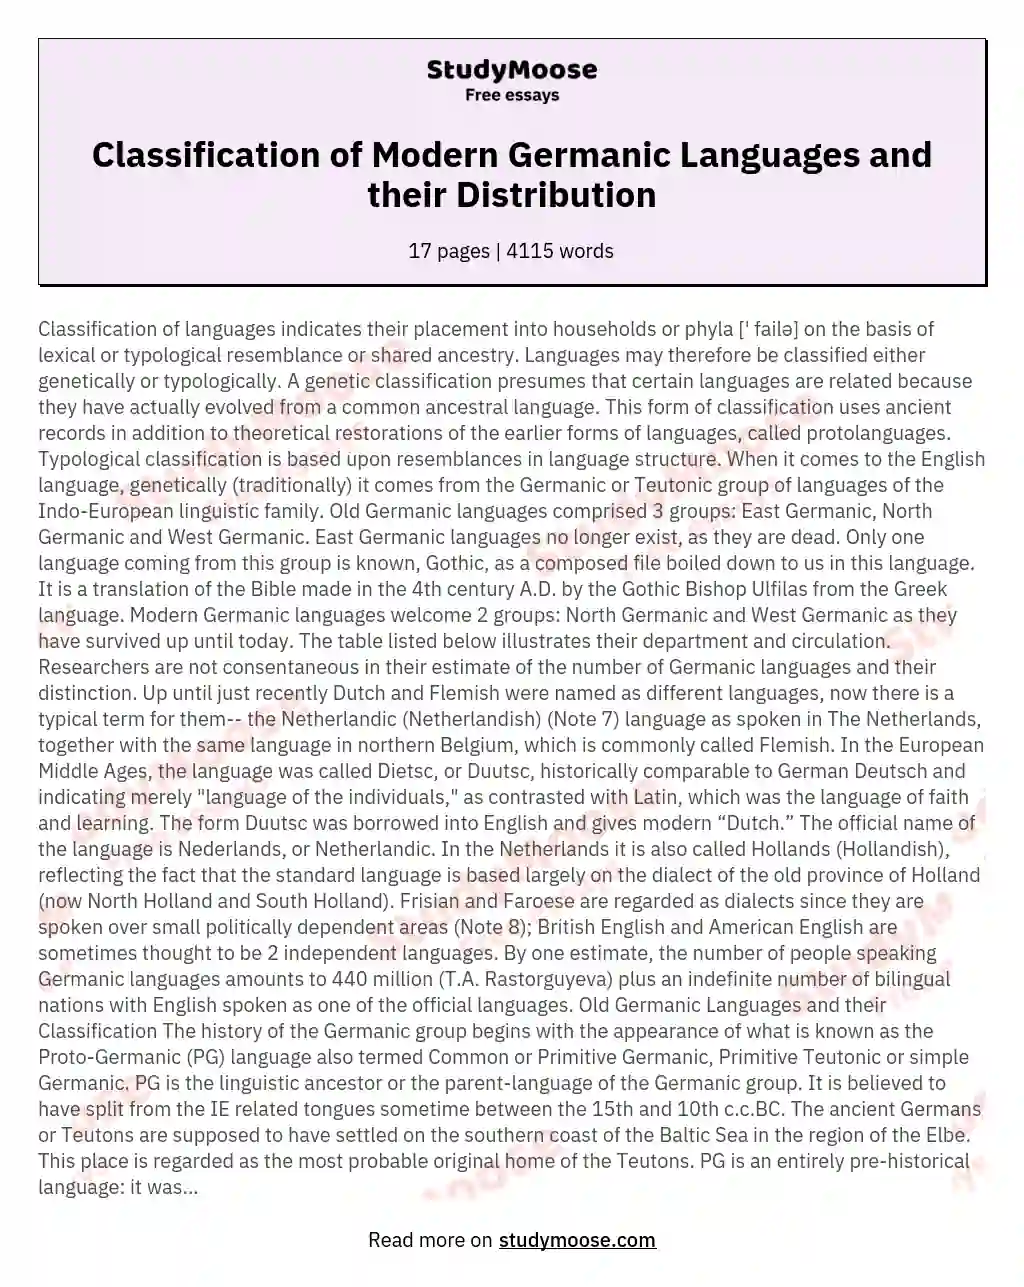 Classification of Modern Germanic Languages and their Distribution essay